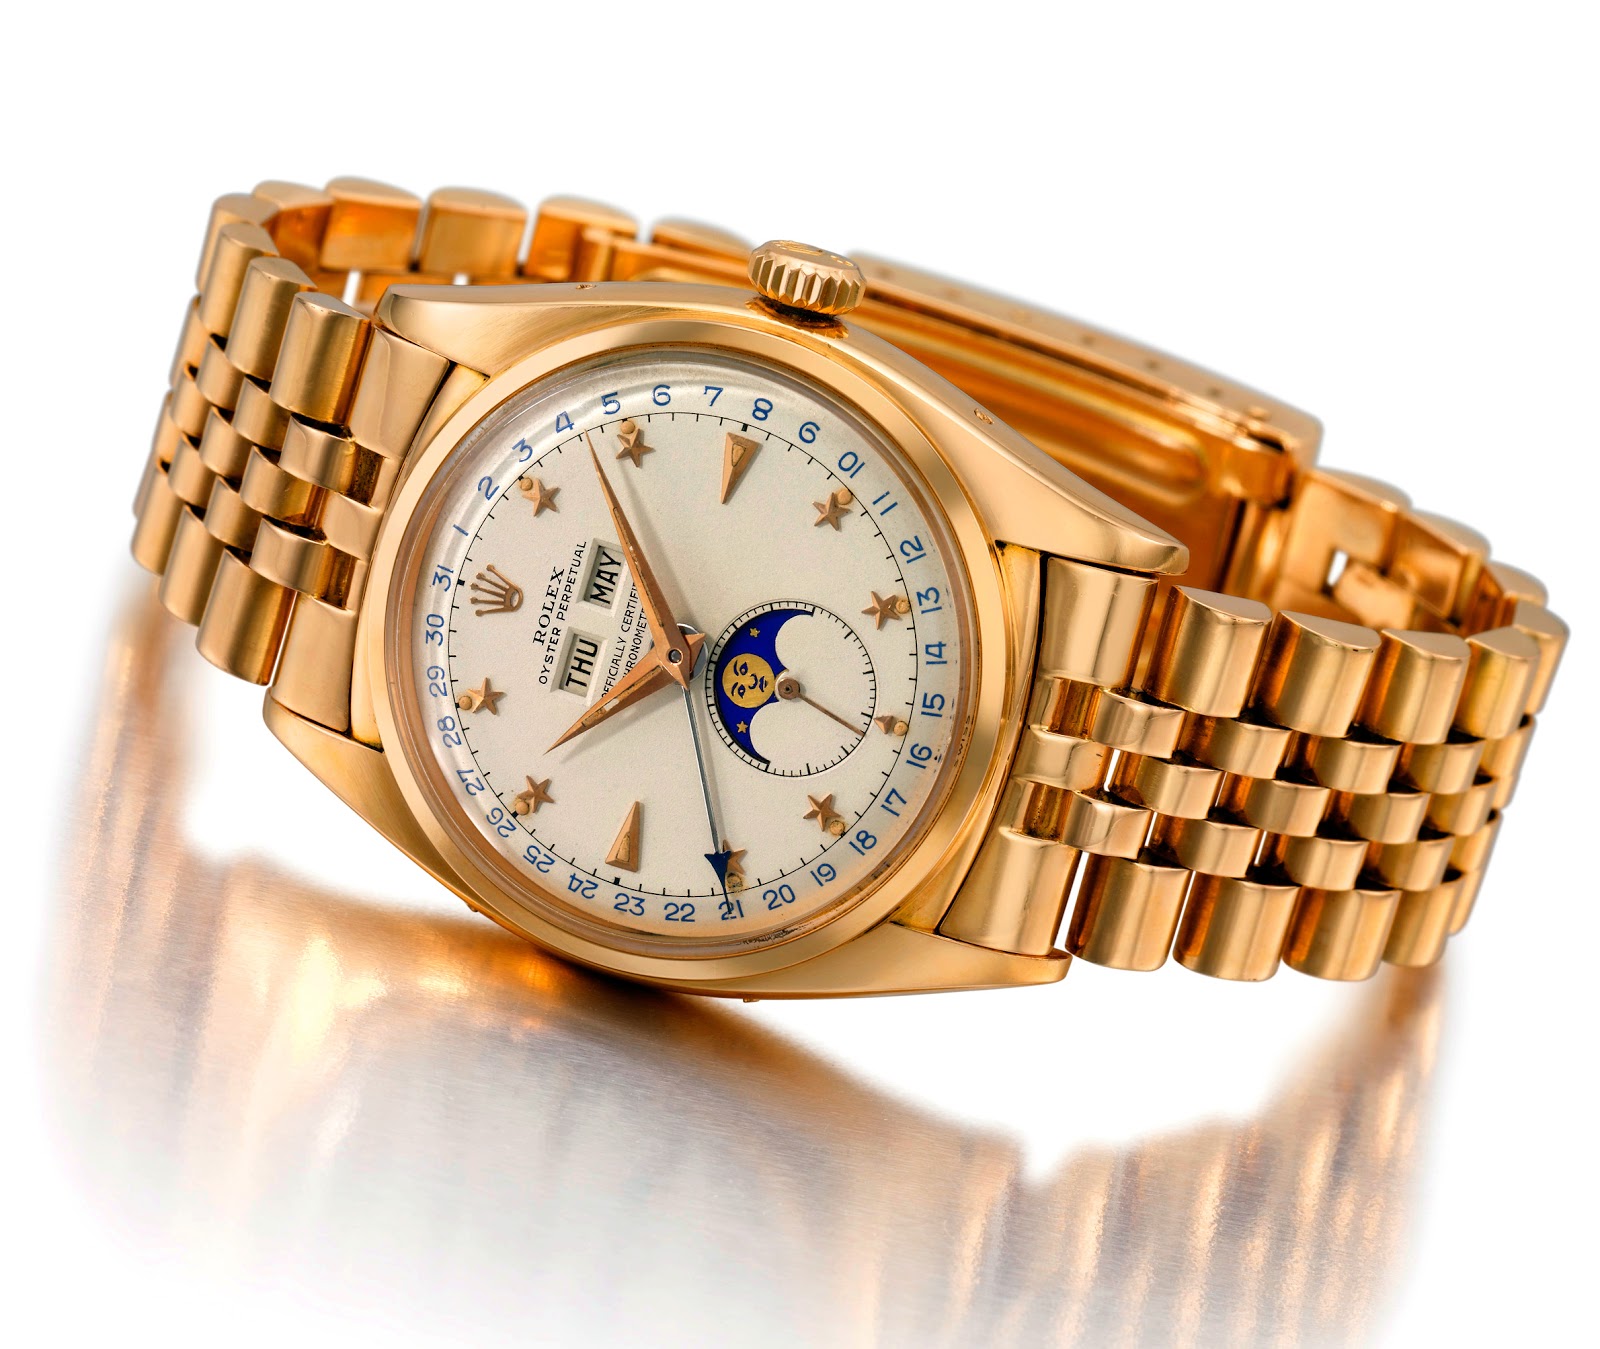 Rolex-Moonphase-Reference-6062.jpg